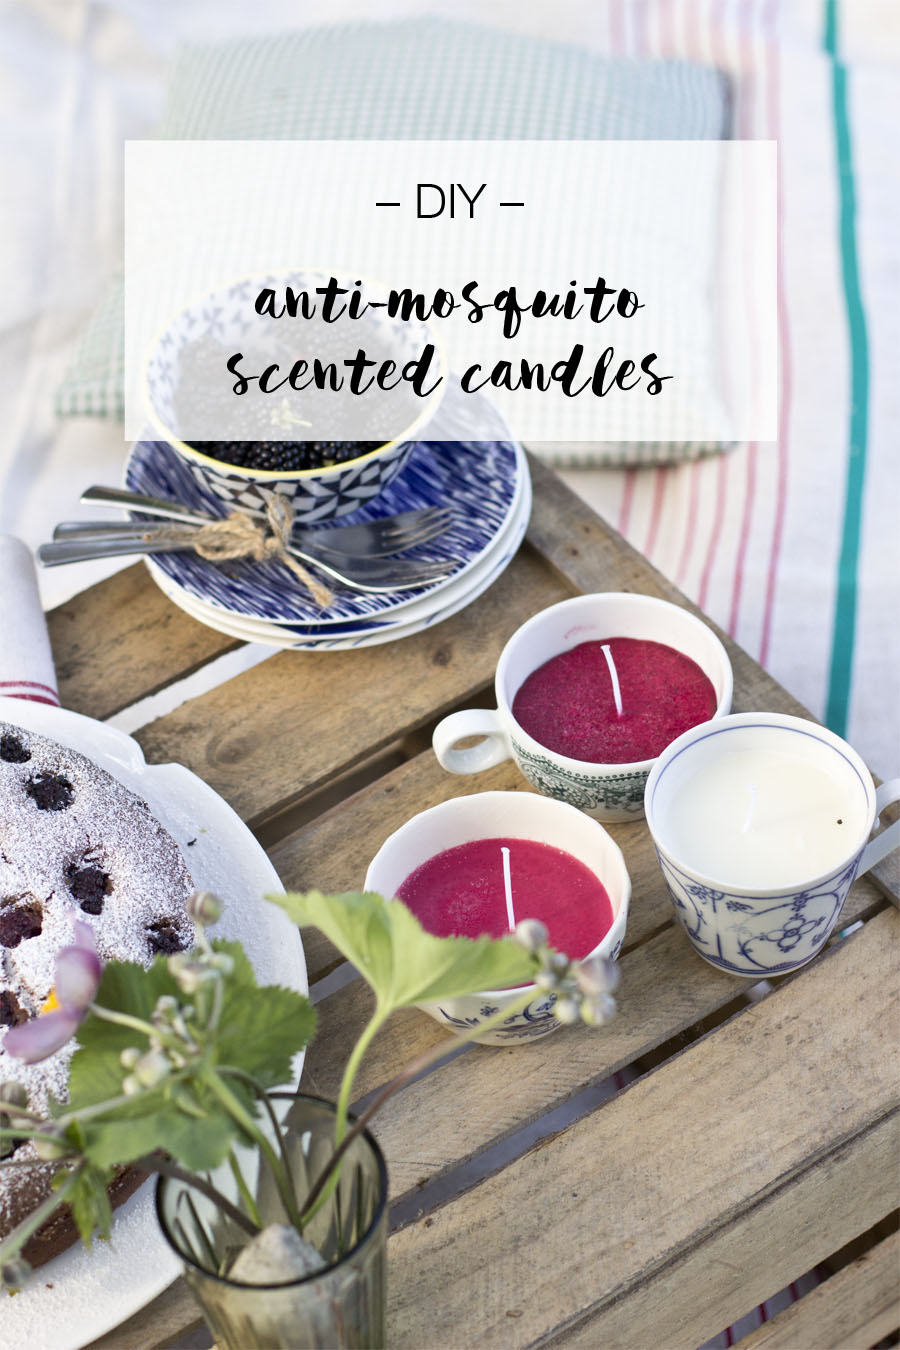 anti-mosquitoes scented candles DIY | LOOK WHAT I MADE ...